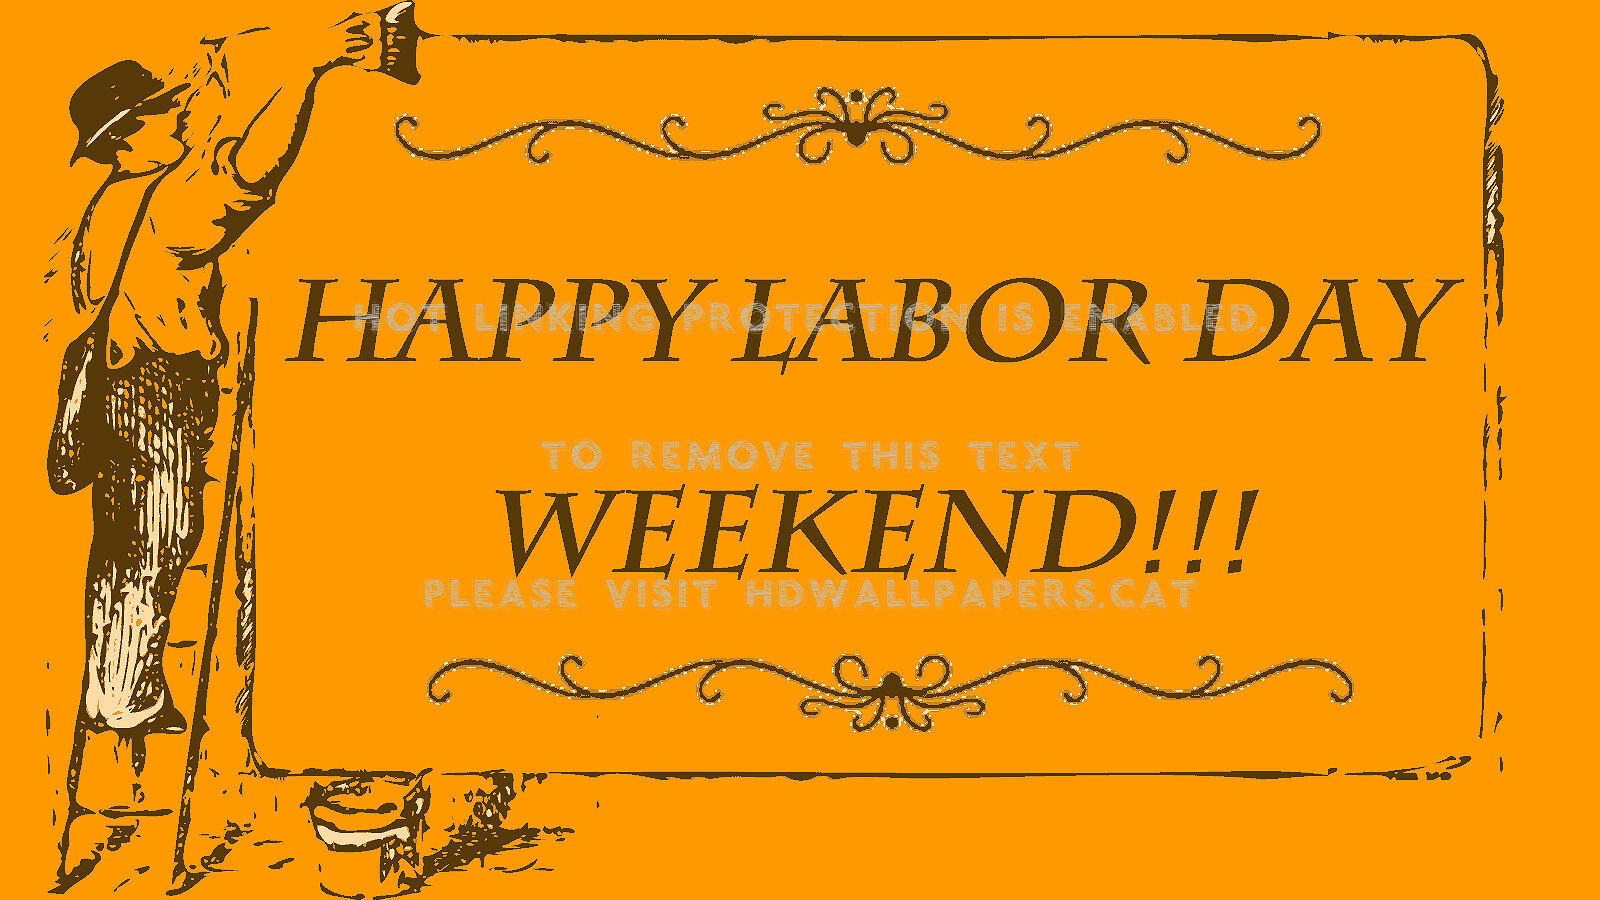 Labor Day Weekend Signs Political Fun Funny - Drawing Of Man Who Is Painting - HD Wallpaper 